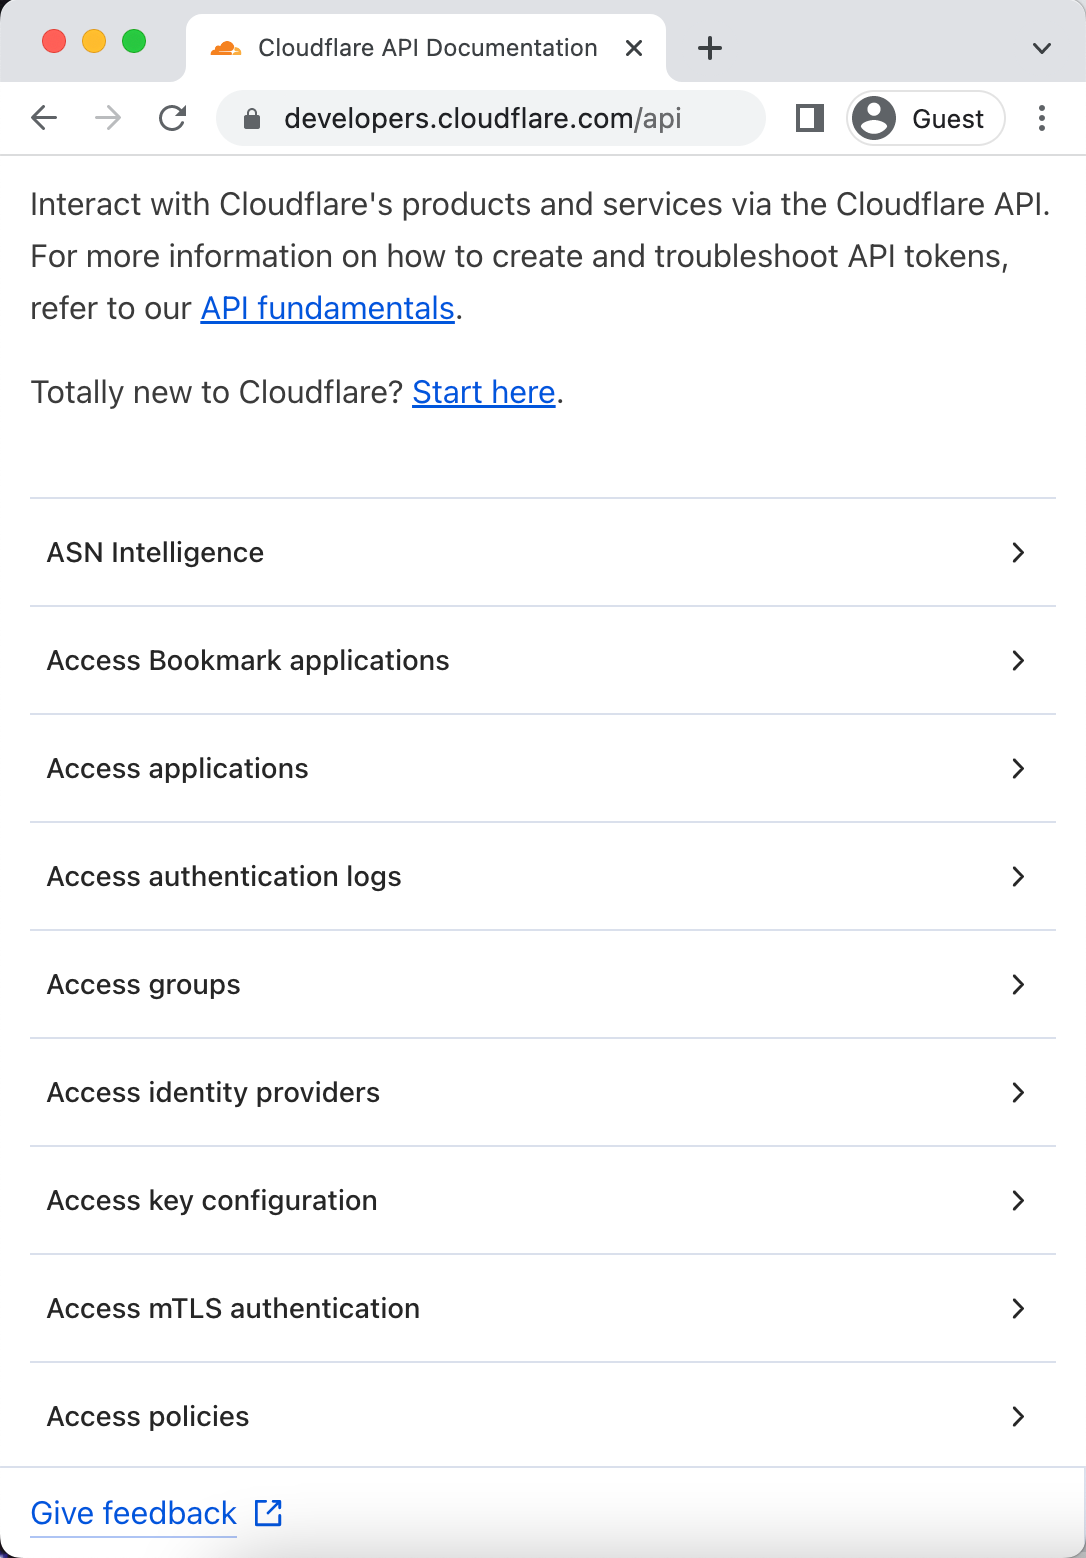 Screen capture of the new API documentation site on mobile, showing the alphabetized list of endpoints.